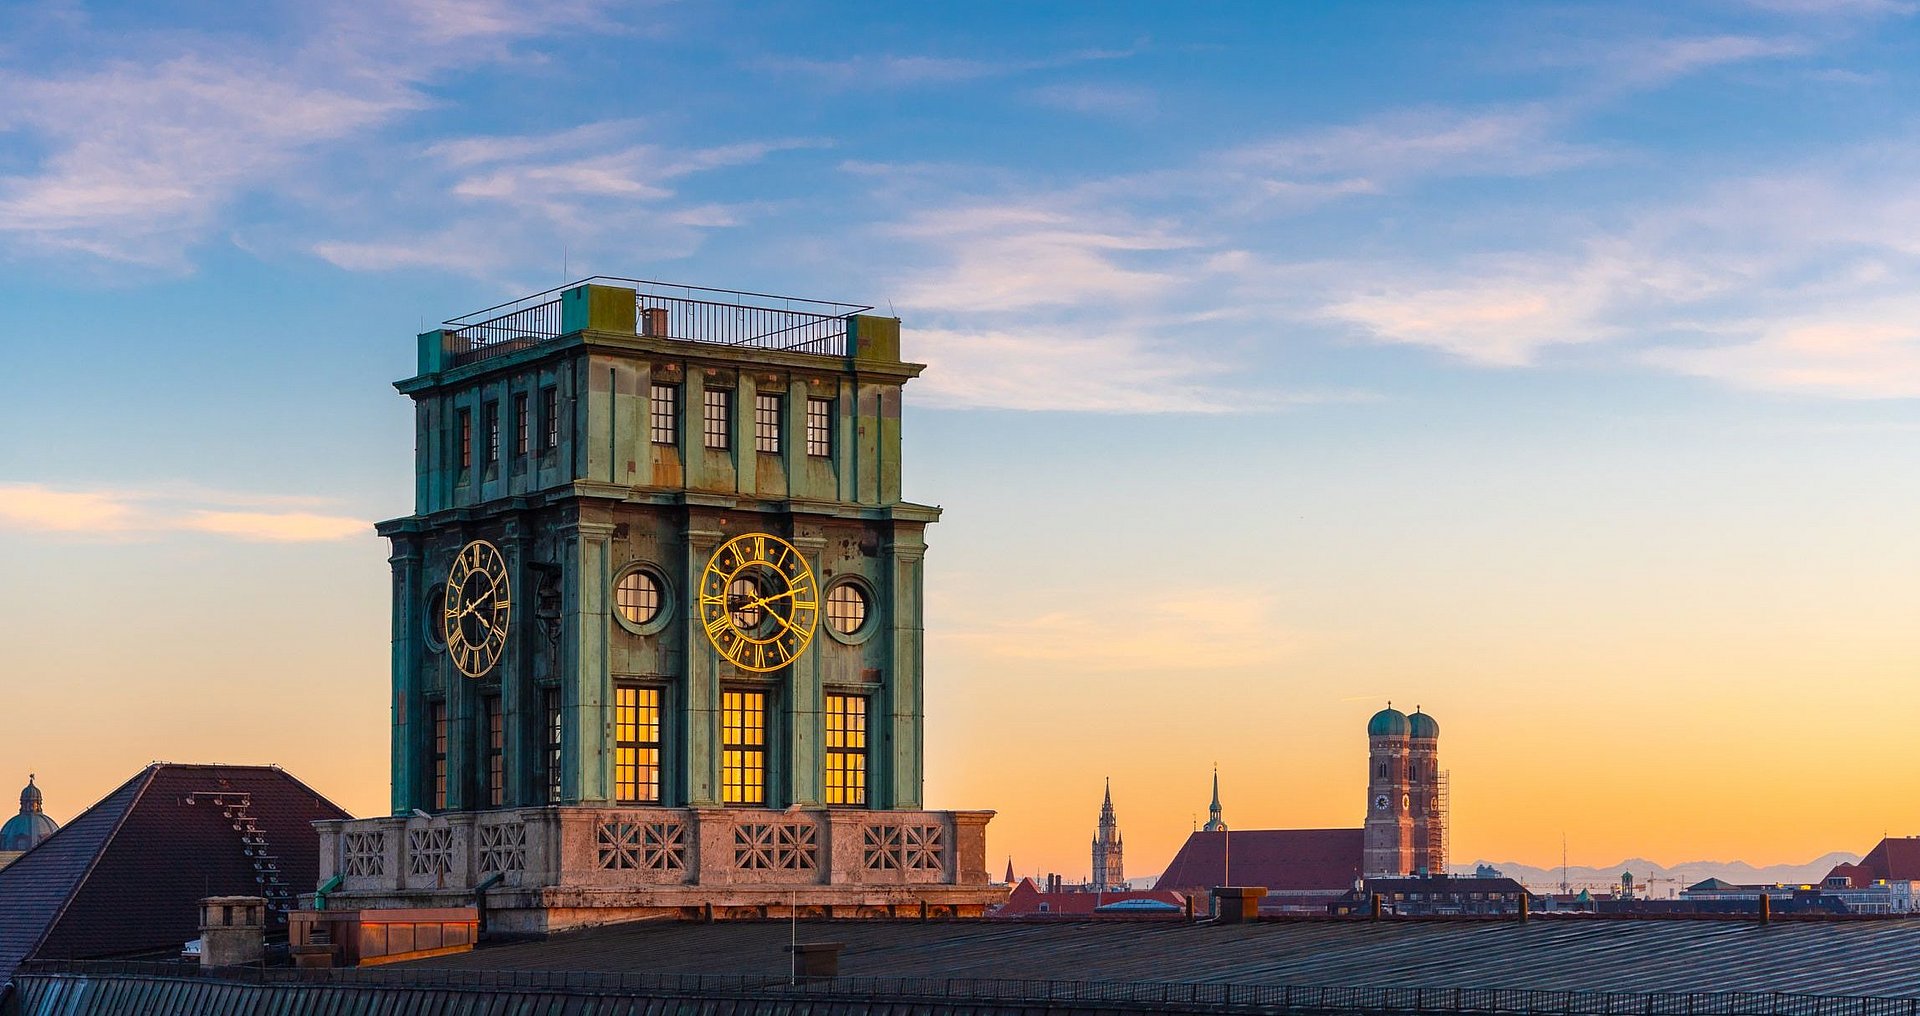 The skyline of downtown Munich at sunset. In focus is the Thiersch Tower, a bell tower and the landmark of the TUM.